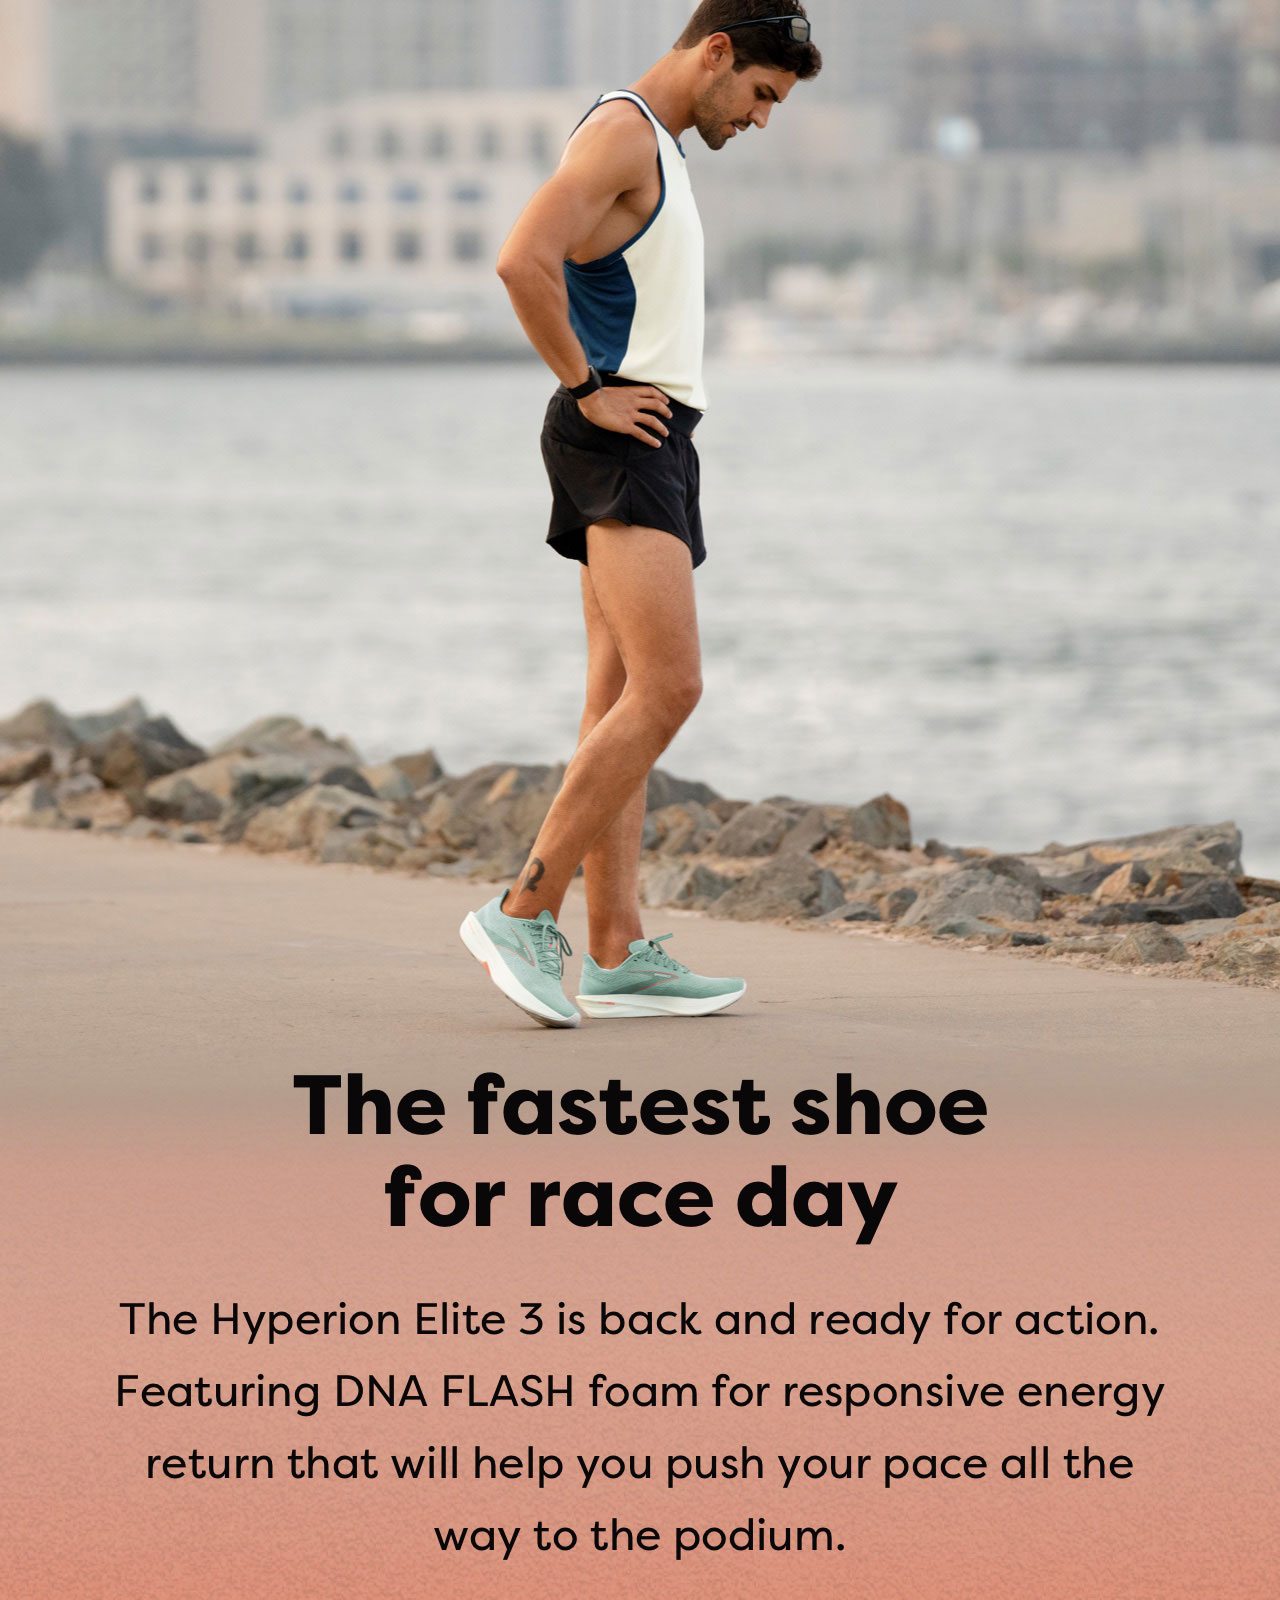 The fastest shoe for race day | The Hyperion Elite 3 is back and ready for action. Featuring DNA FLASH foam for responsive energy return that will help you push your pace all the way to the podium.